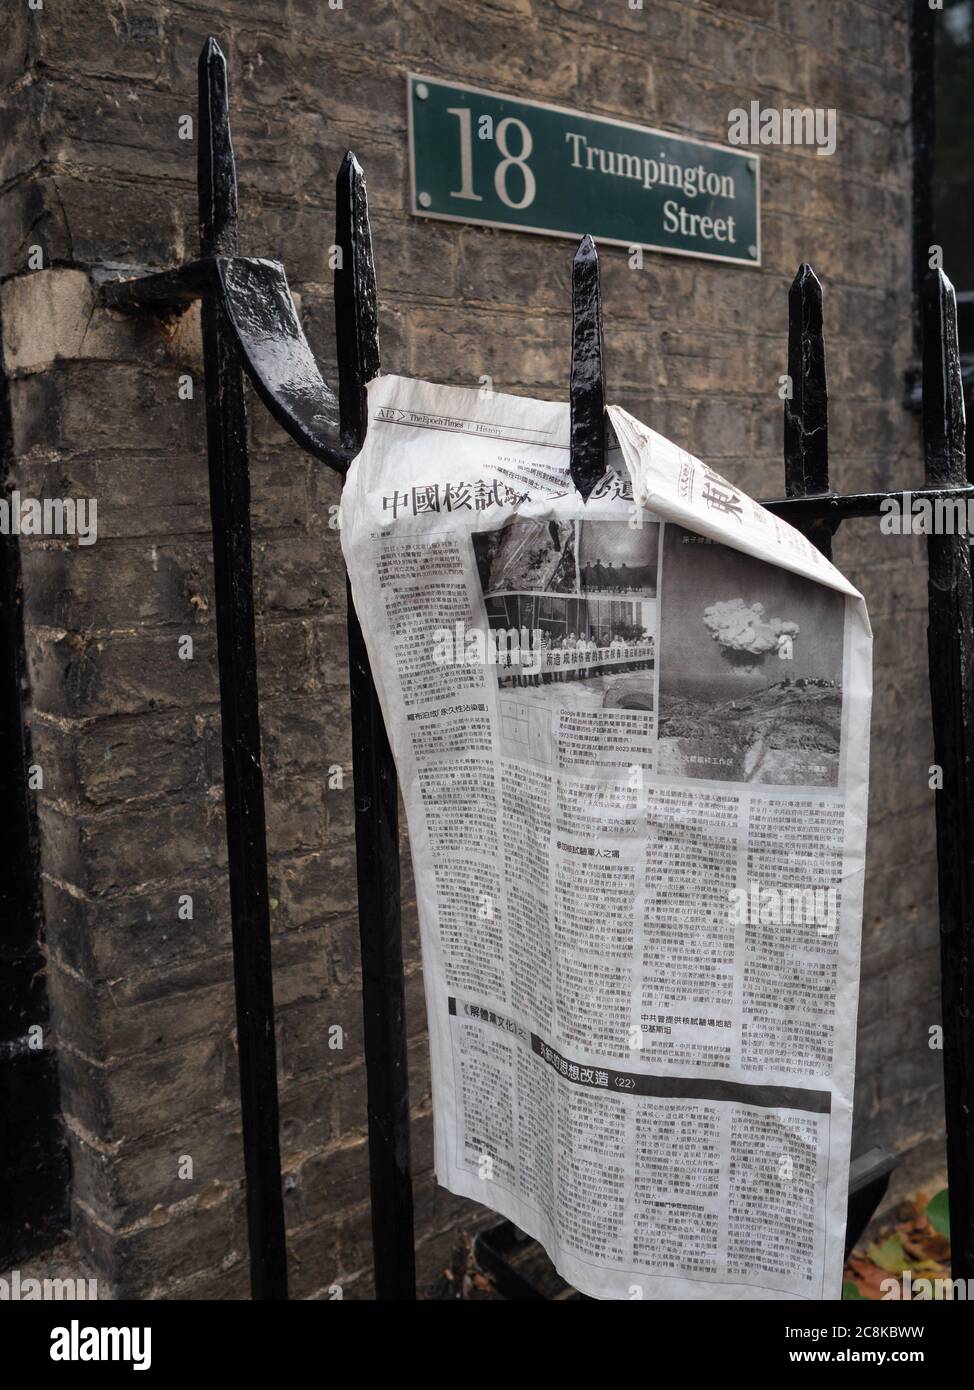 Newspaper  attached to railings at Trumpington Street, Cambridge showing Chinese, Korean or Japanese language newspaper with picture of an atom bomb. Stock Photo